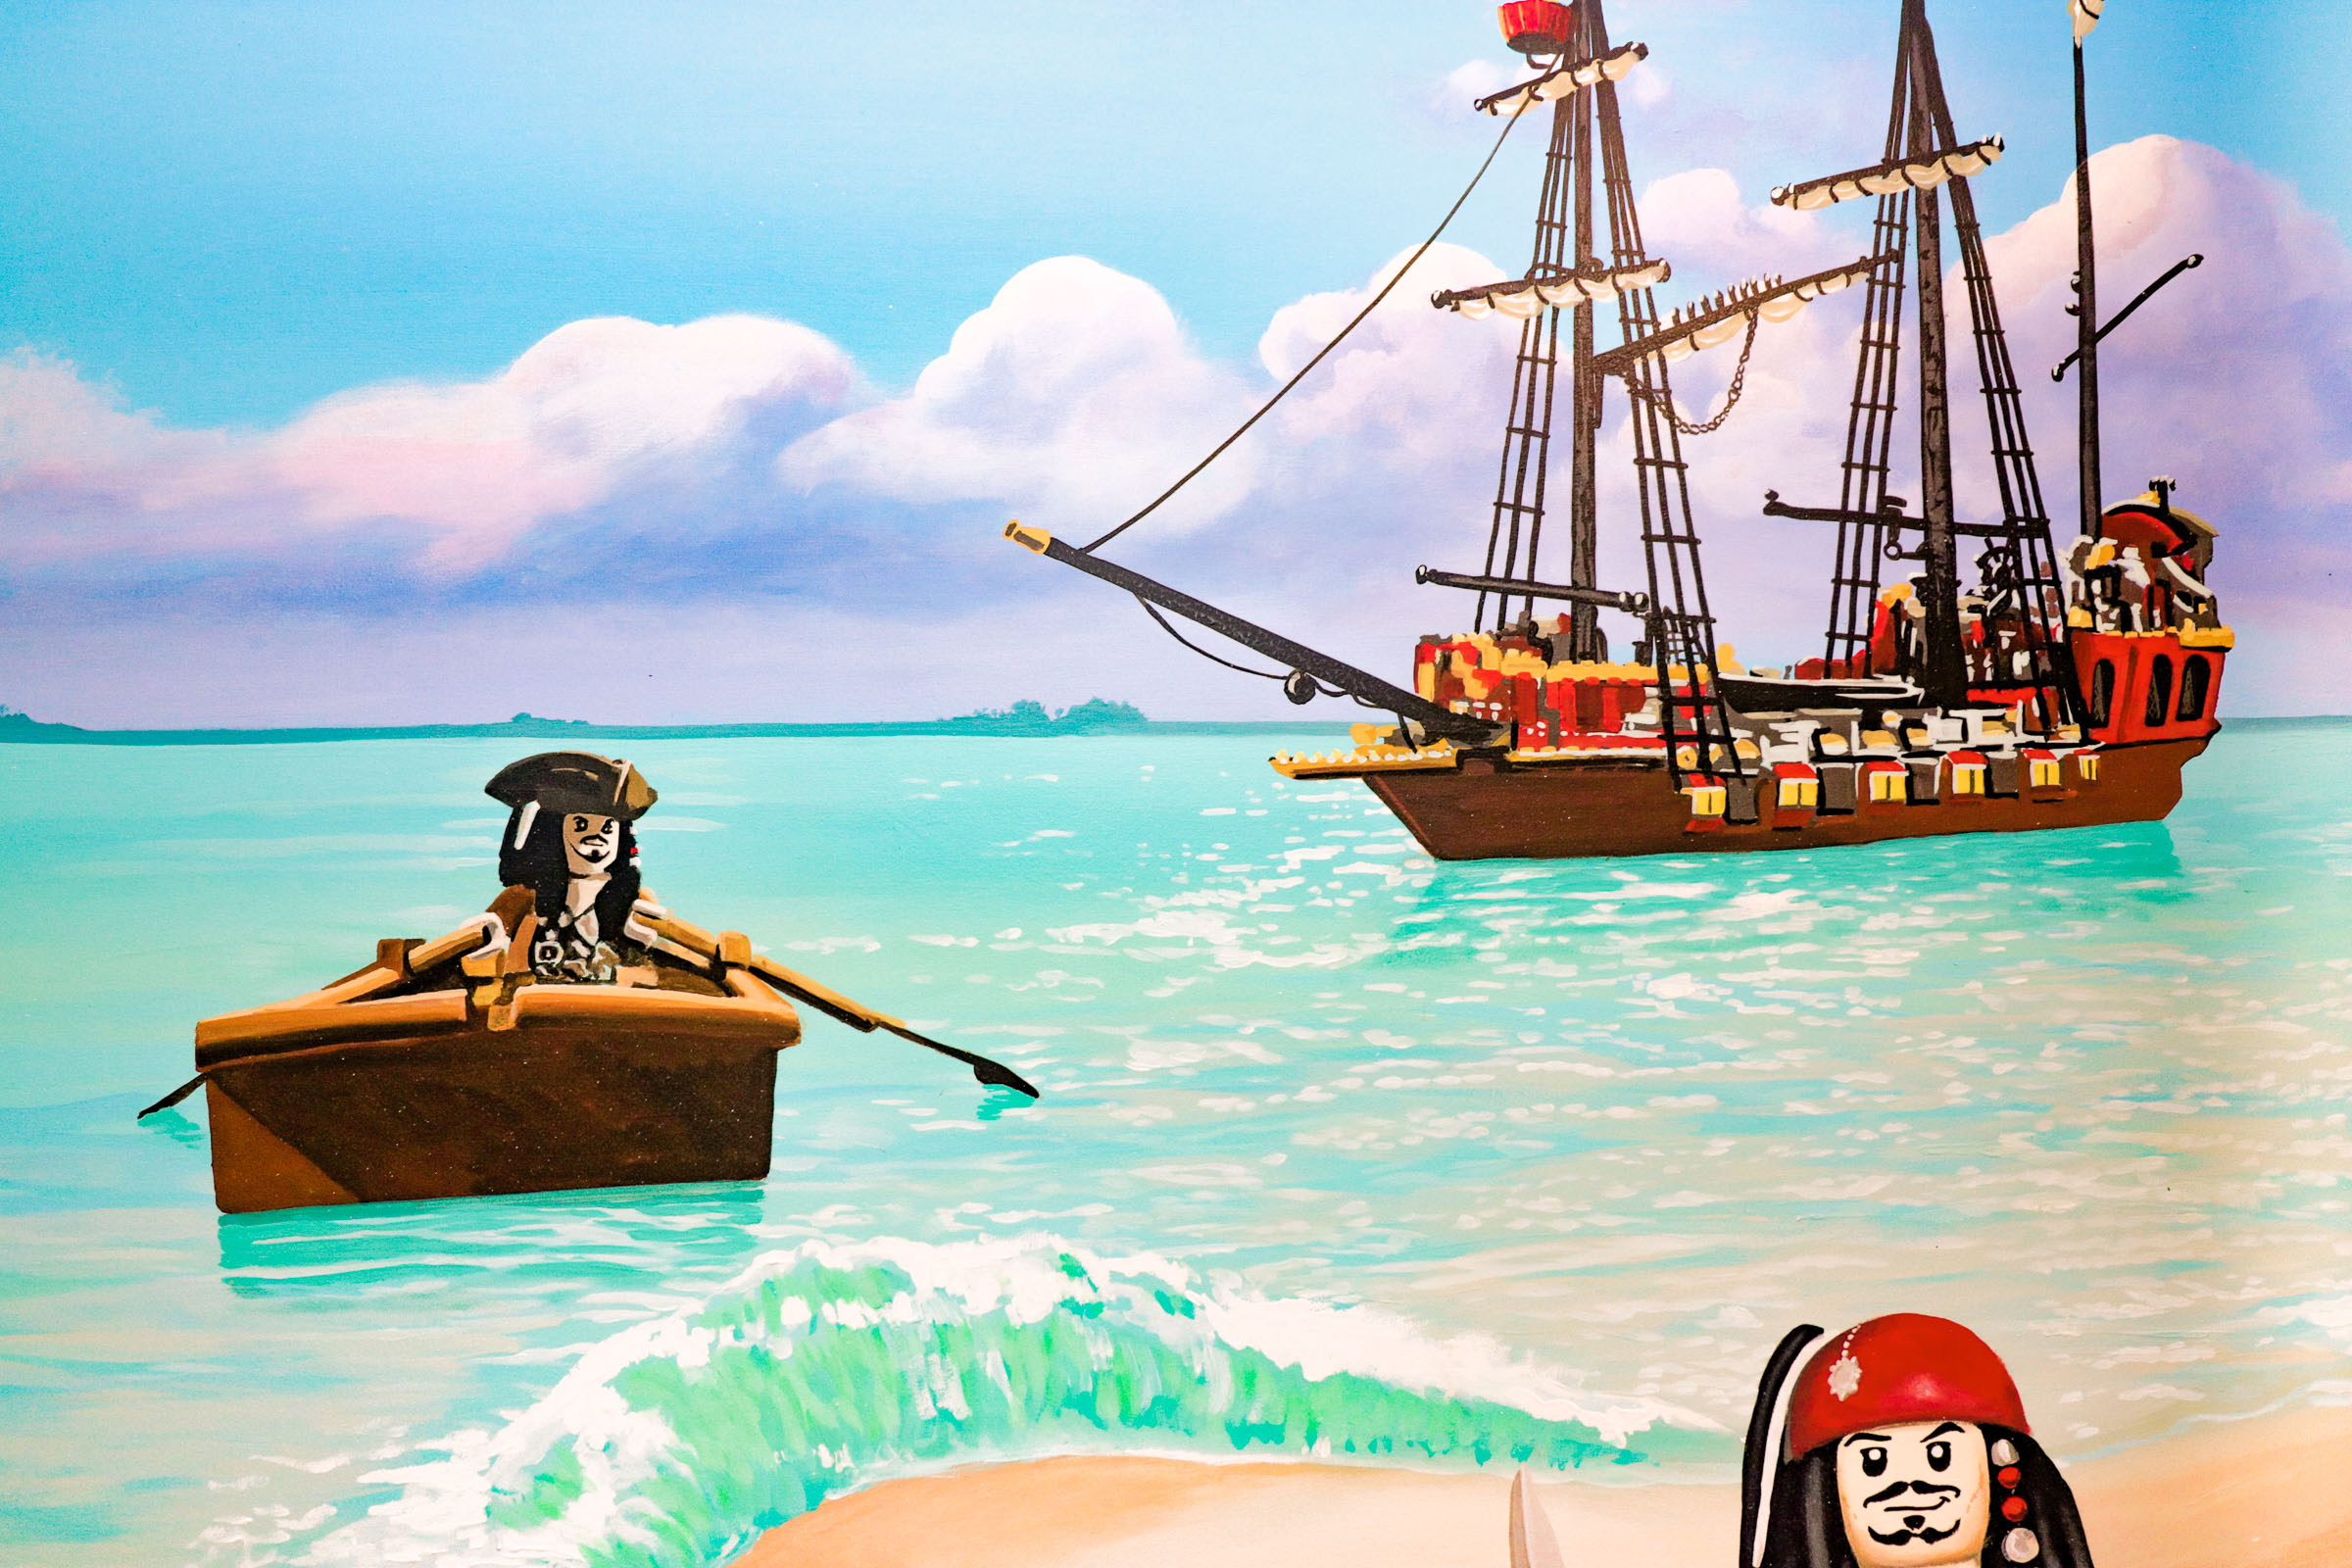 Lego Jack Sparrow rowing from the beach to his Lego pirate ship